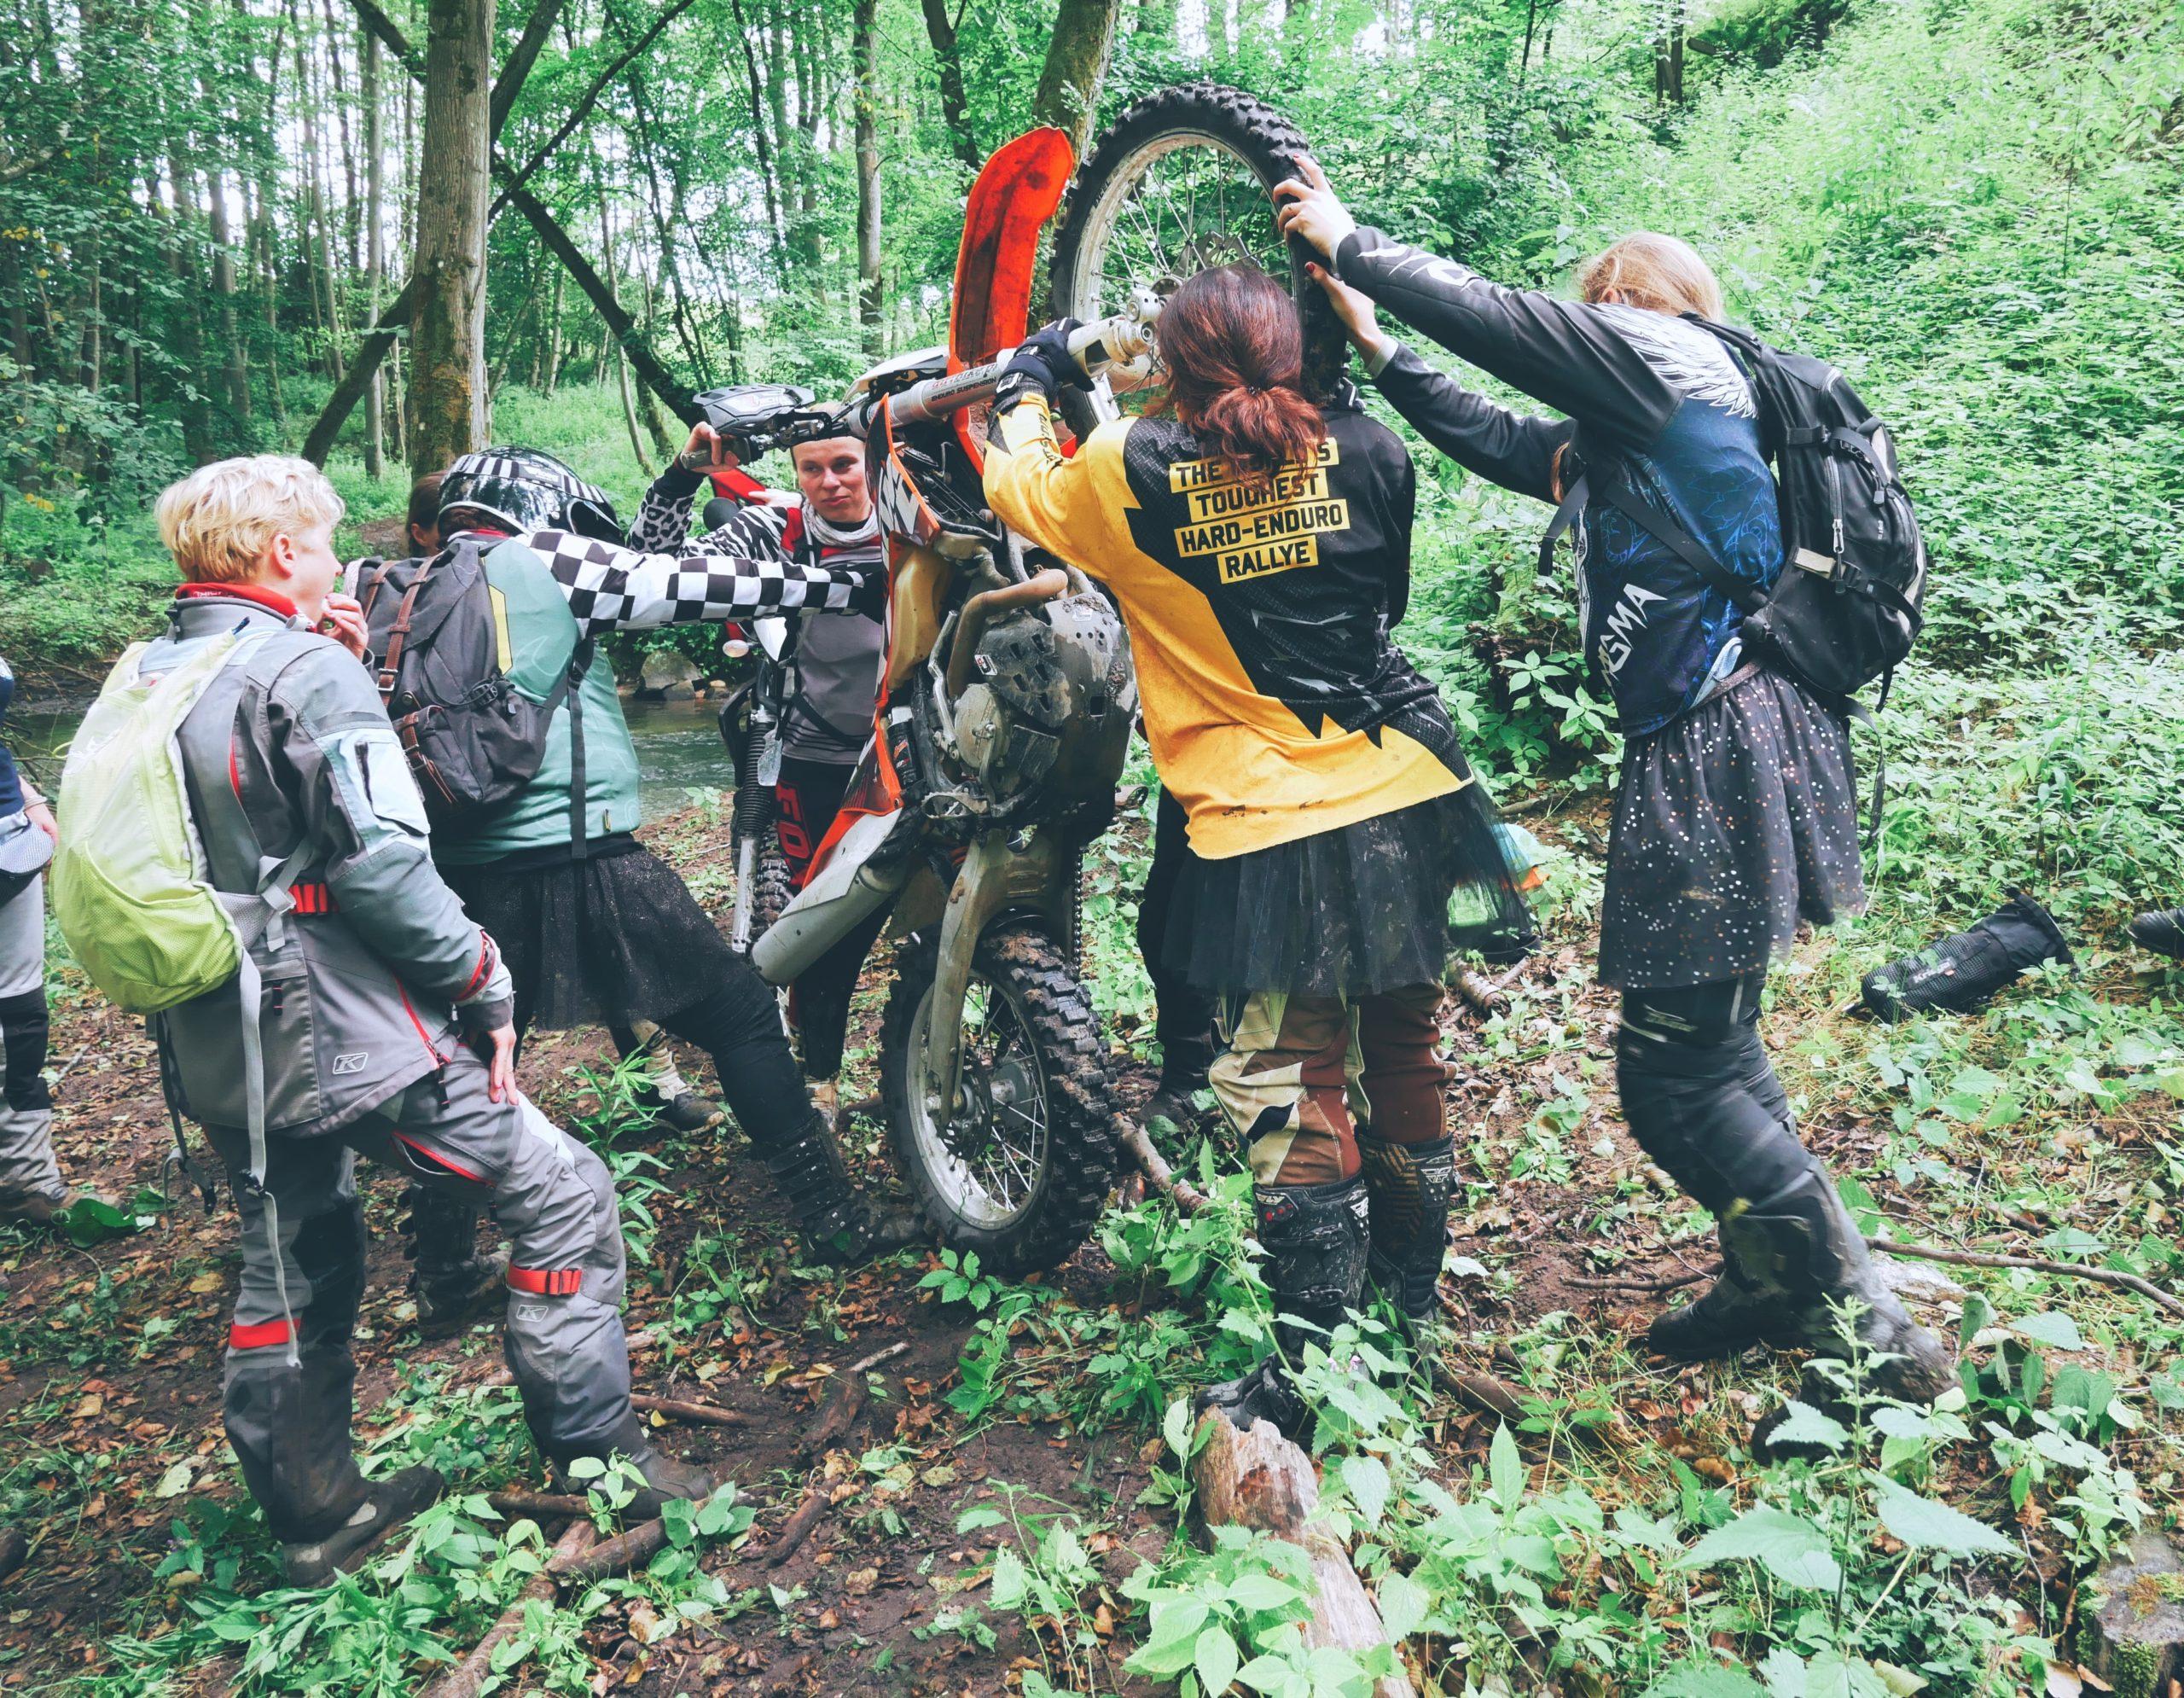 Women's Off-Road Campout: She-Devils in the Dirt // Women ADV Riders